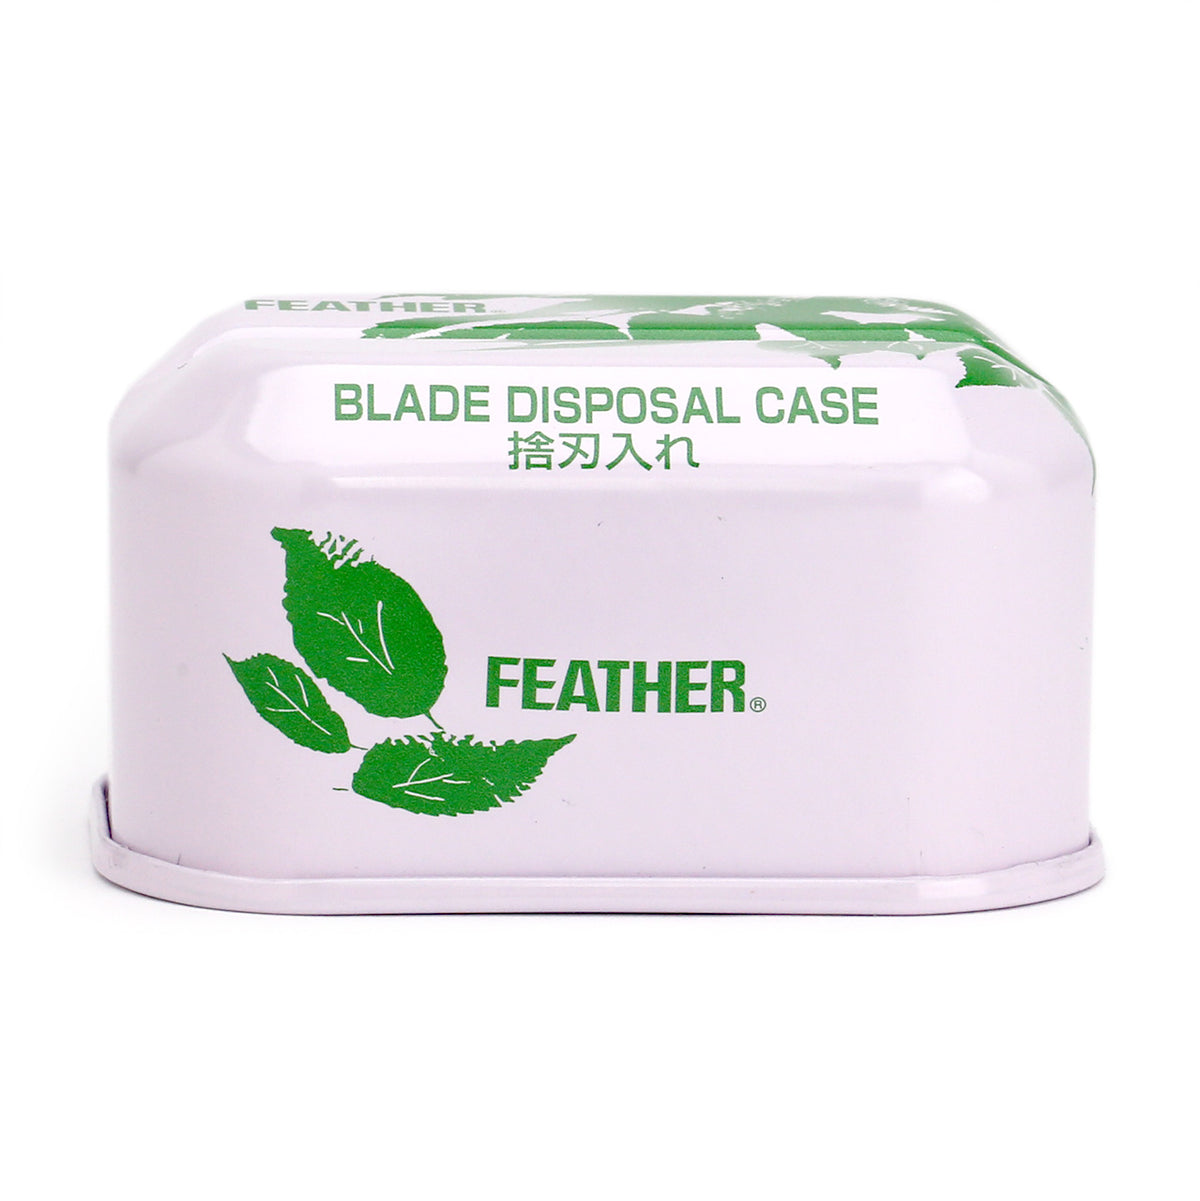 Feather blade bank disposal case, side view